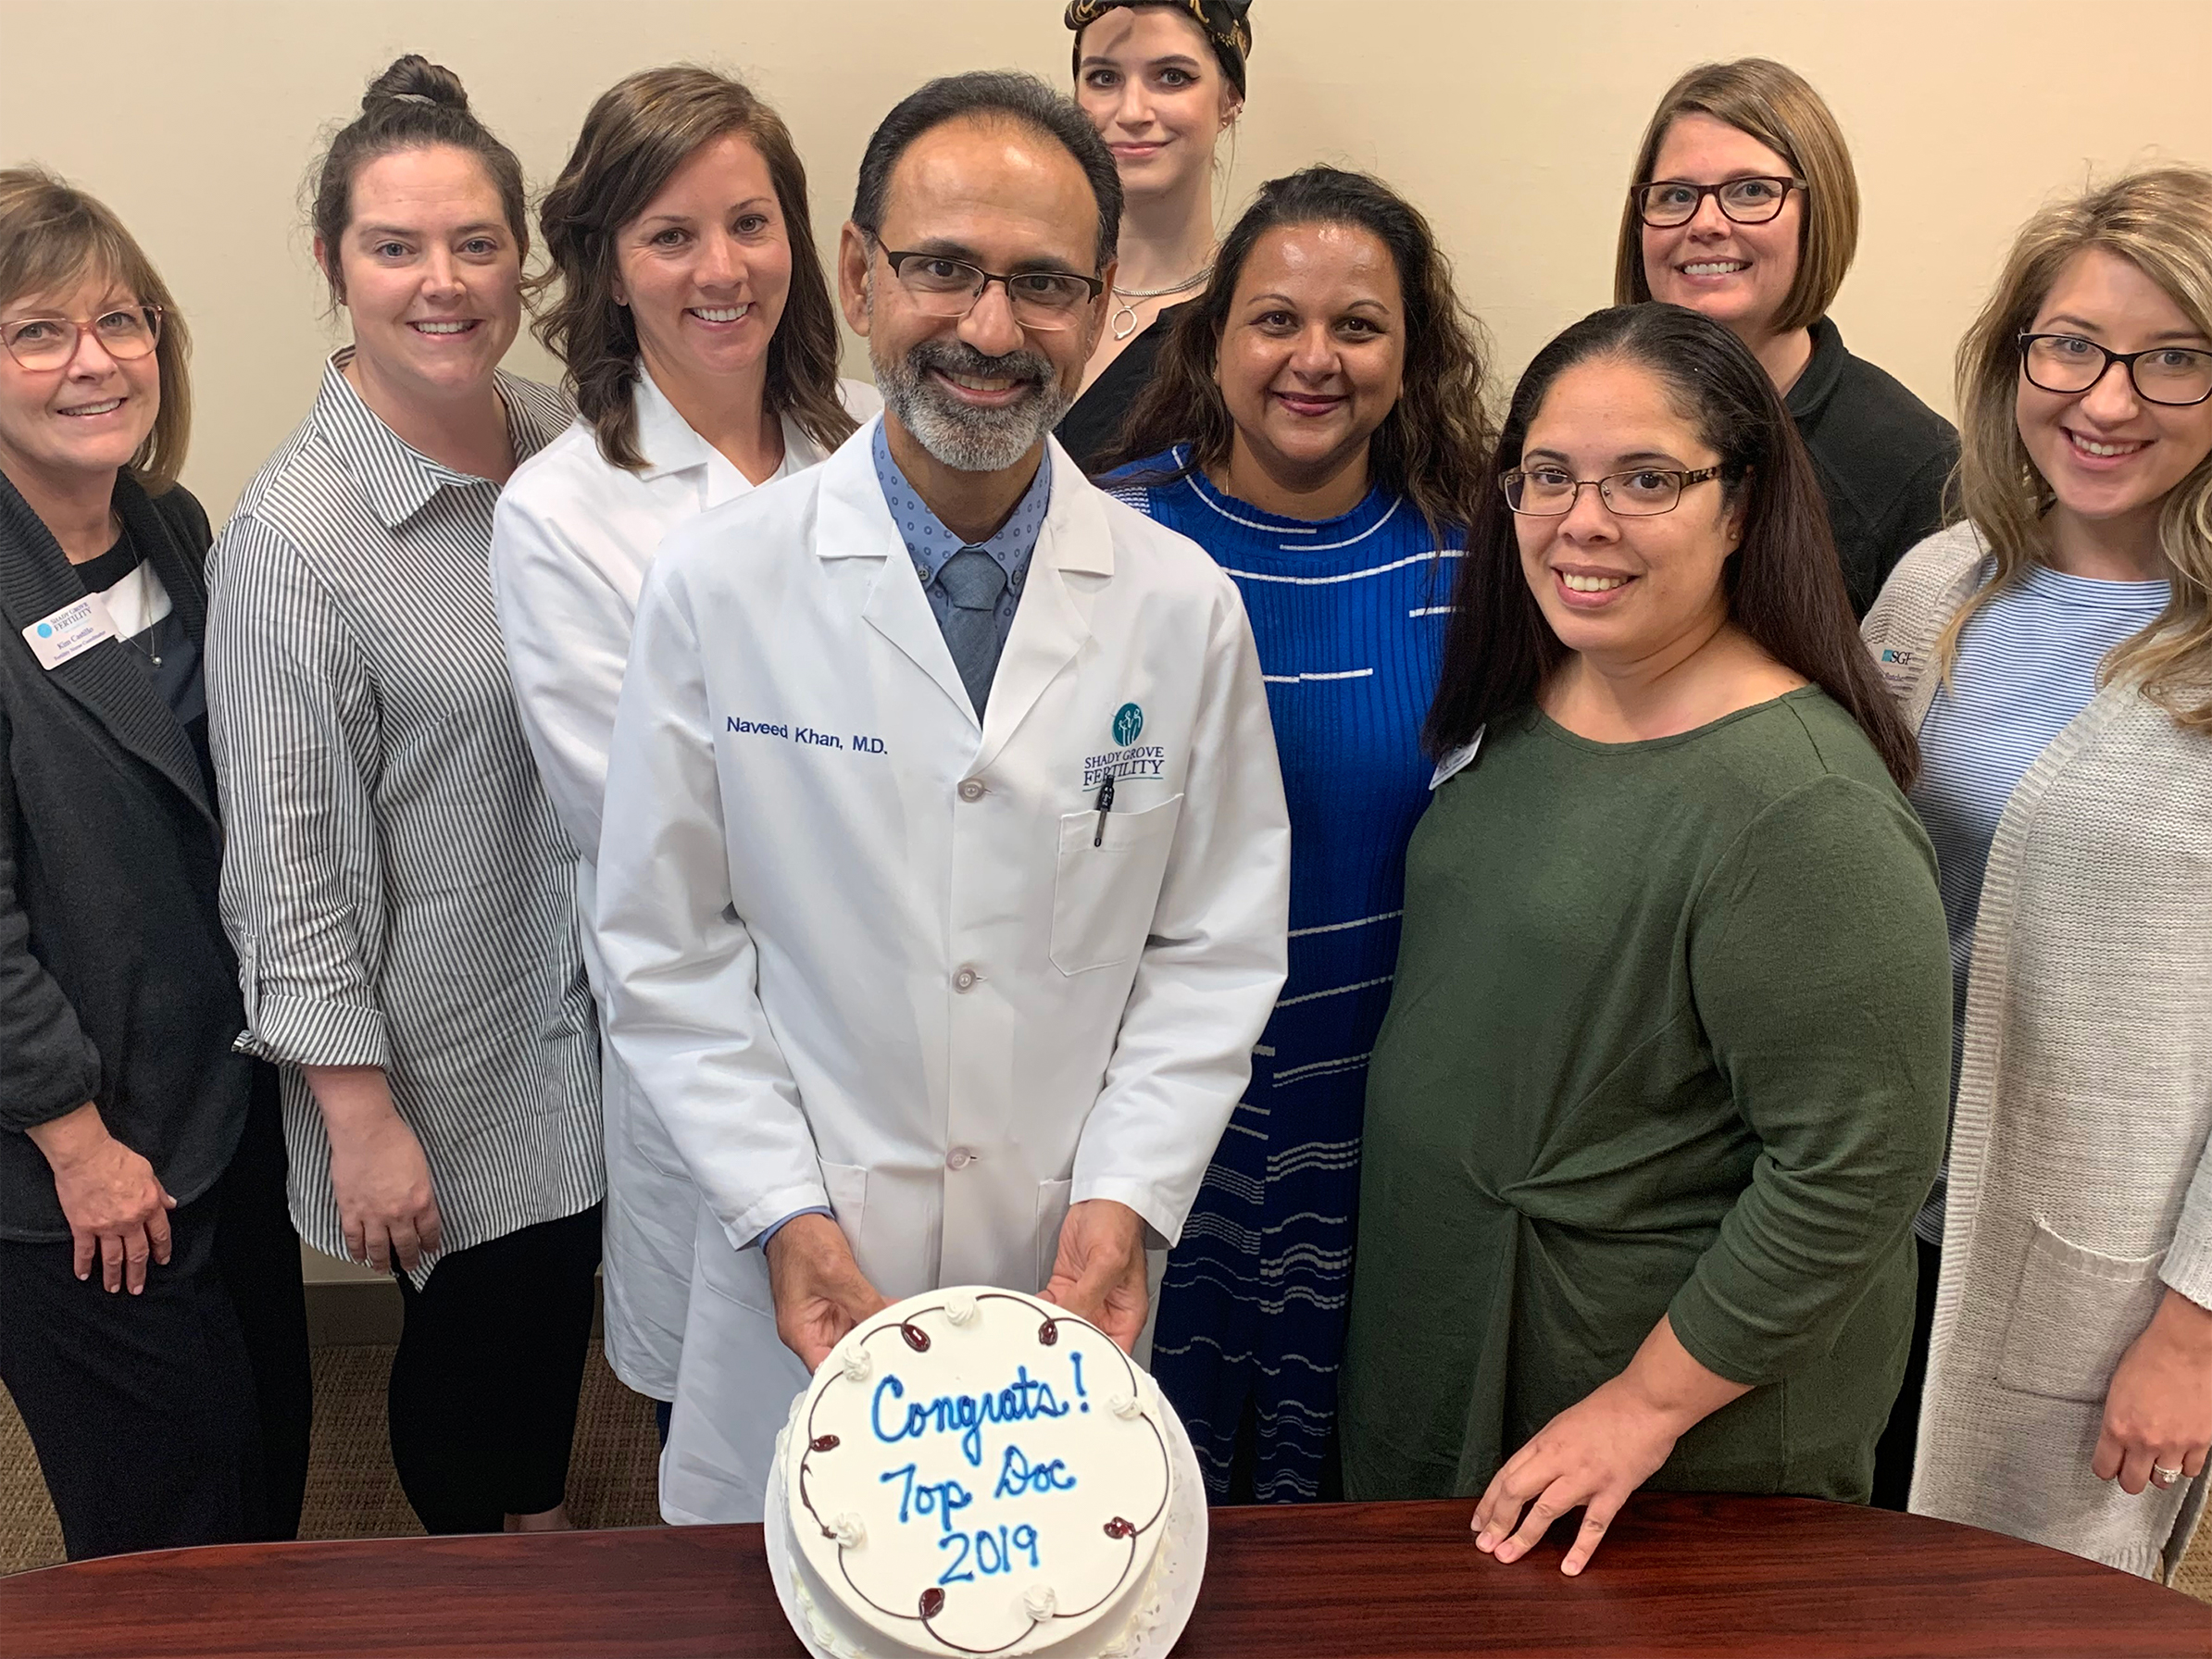 Naveed Khan, M.D. of Shady Grove Fertility celebrates with staff.